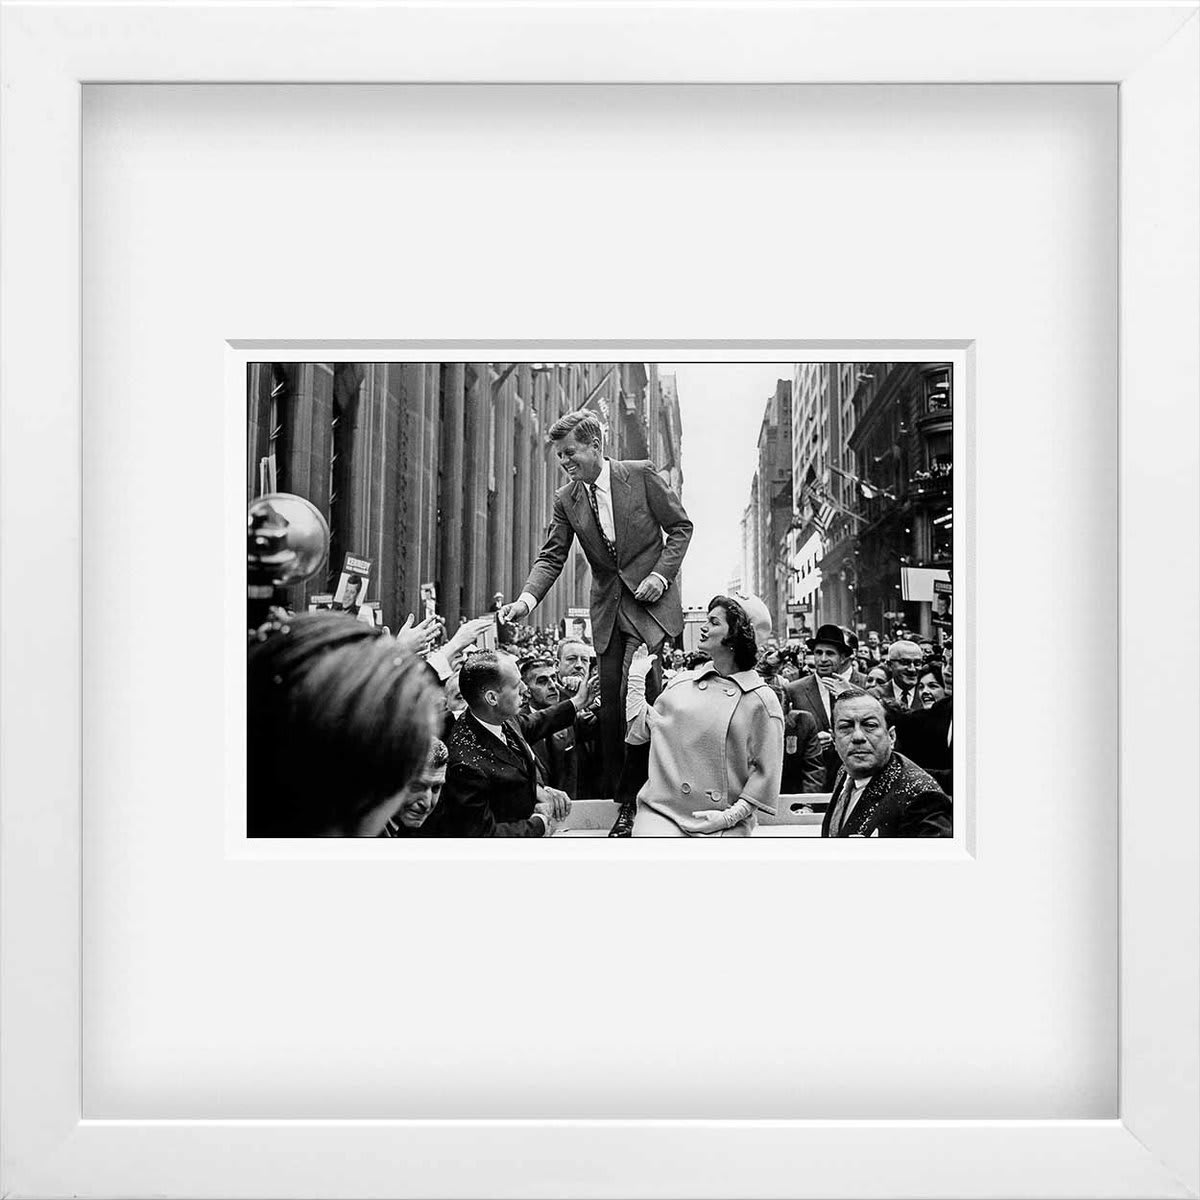 “Images at their passionate and truthful best are as powerful as words can ever be.” Cornell Capa’s powerful 1960 image of John F. Kennedy in New York City is available until Sunday August 2 for just $100. Shop here: https://t.co/DemWWdUkYG © Cornell Capa / Magnum Photos